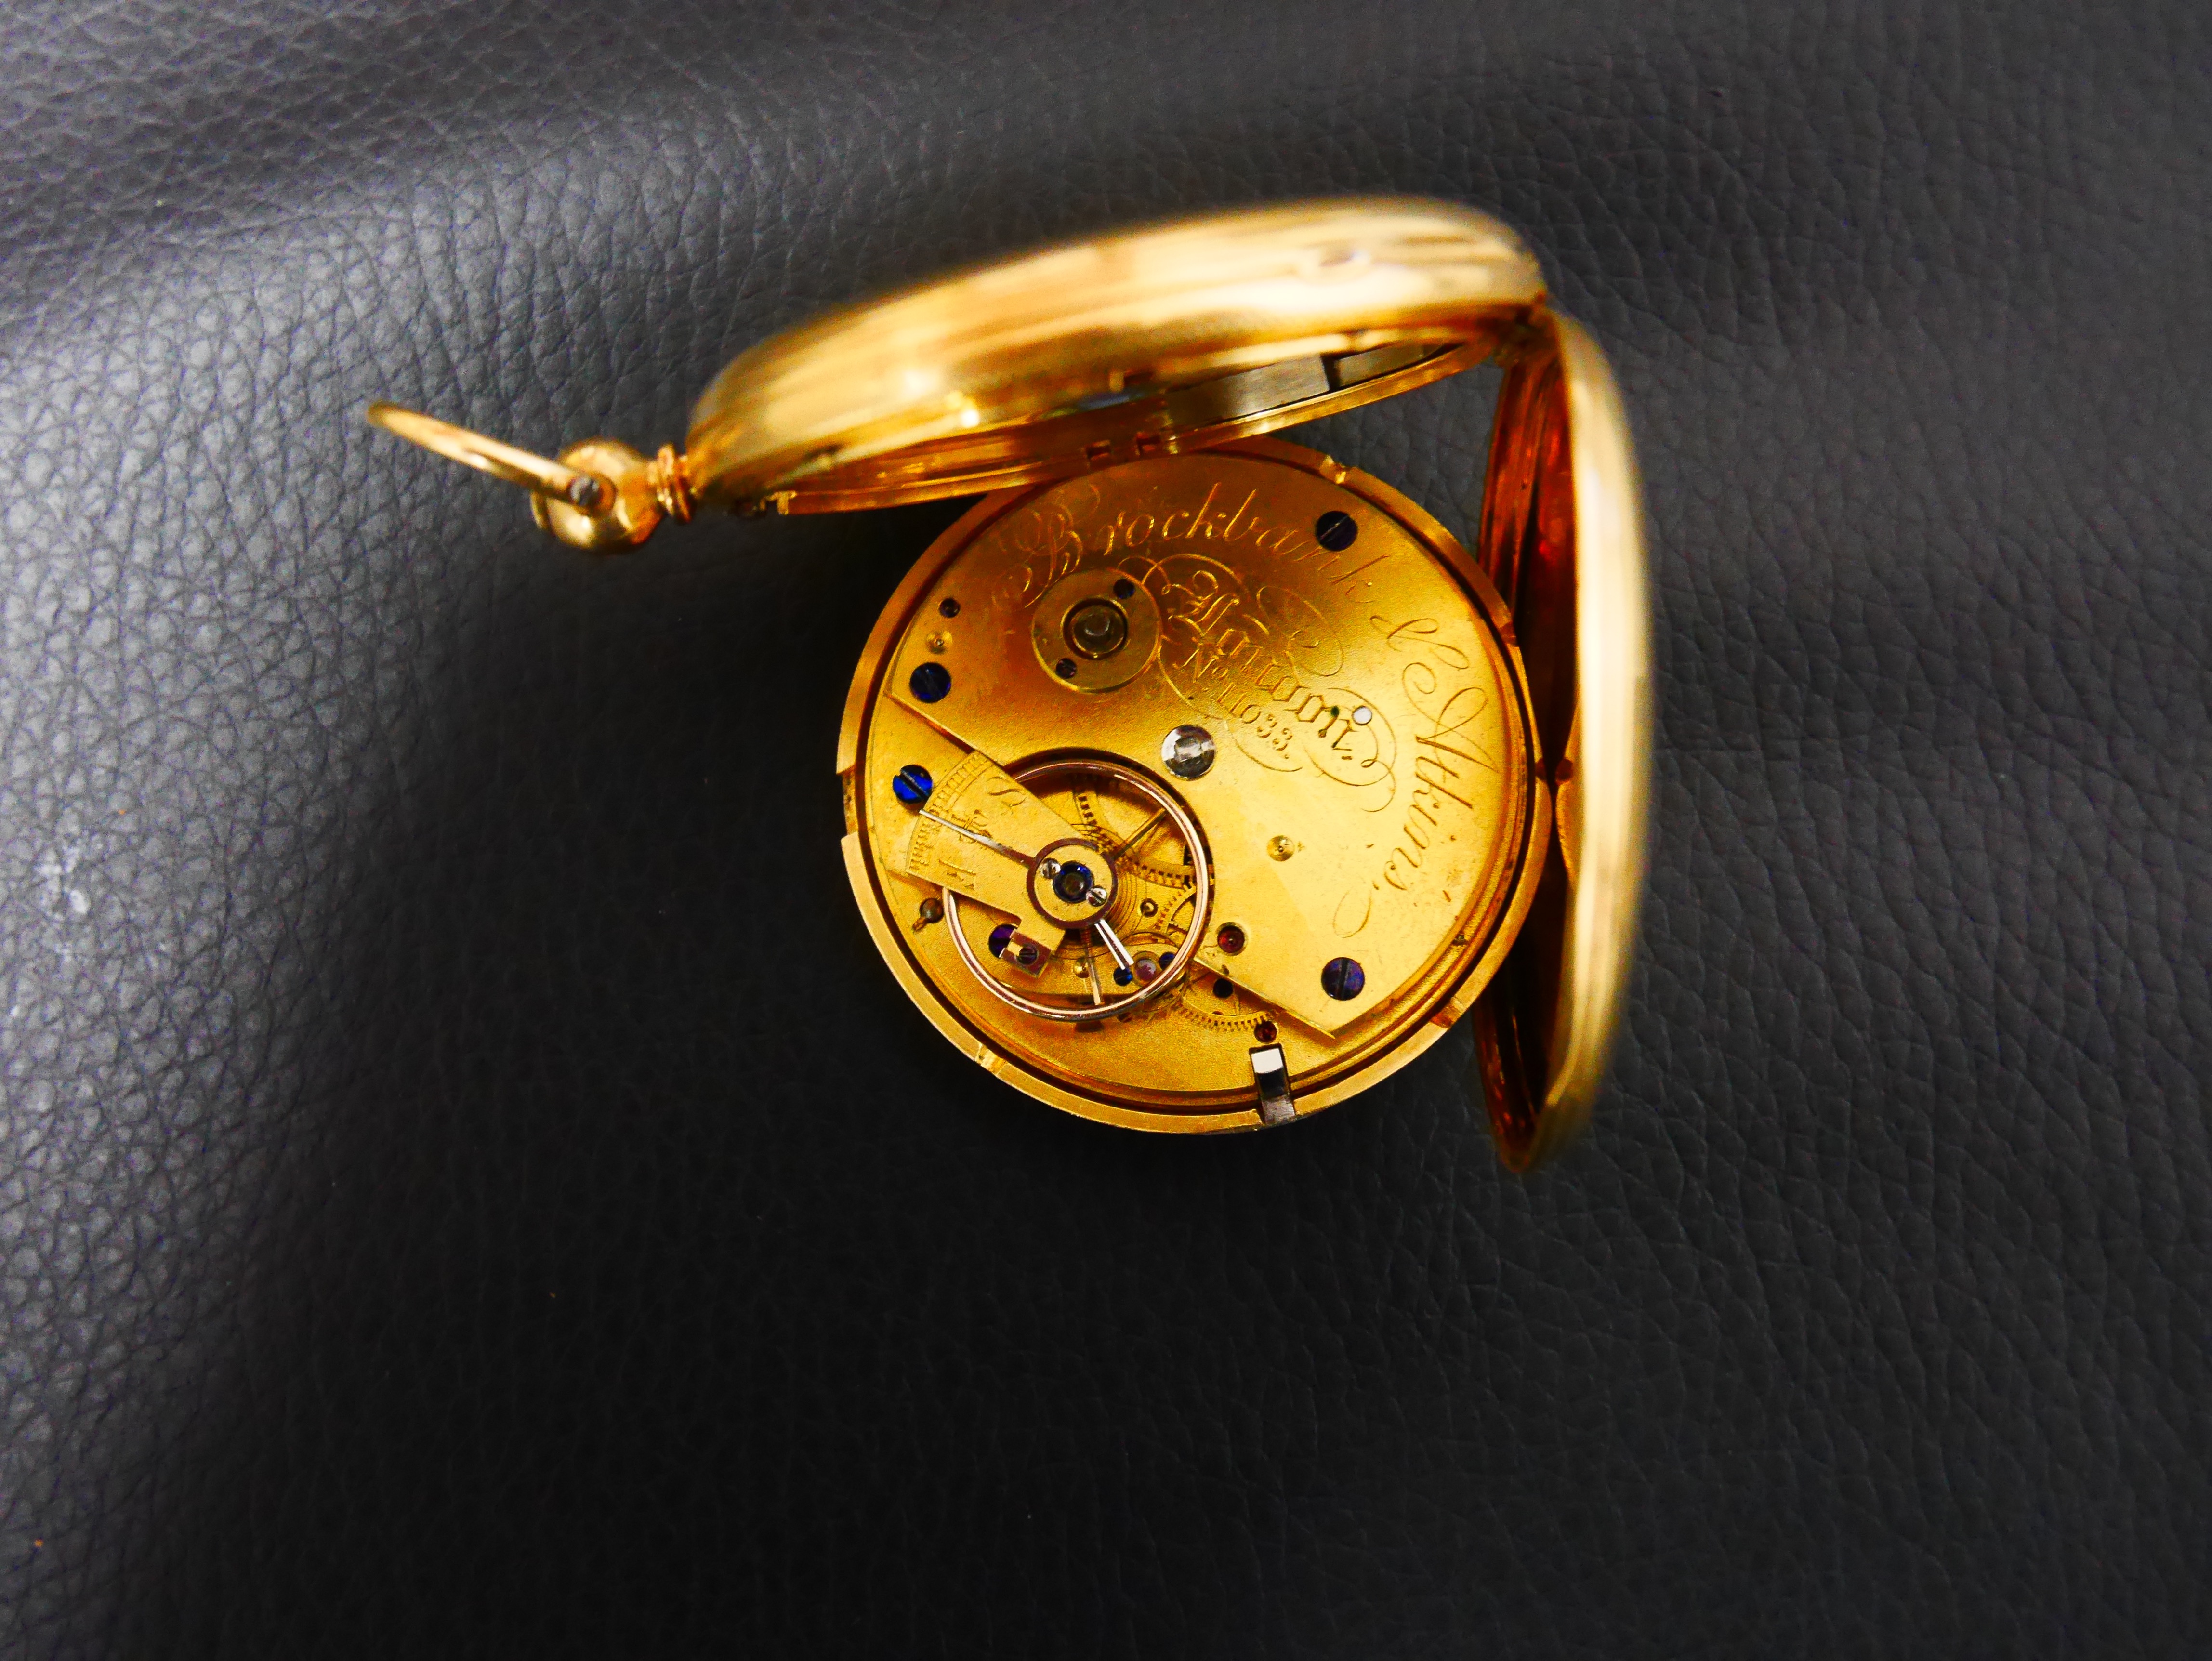 18ct Gold London pocket watch - Image 2 of 5